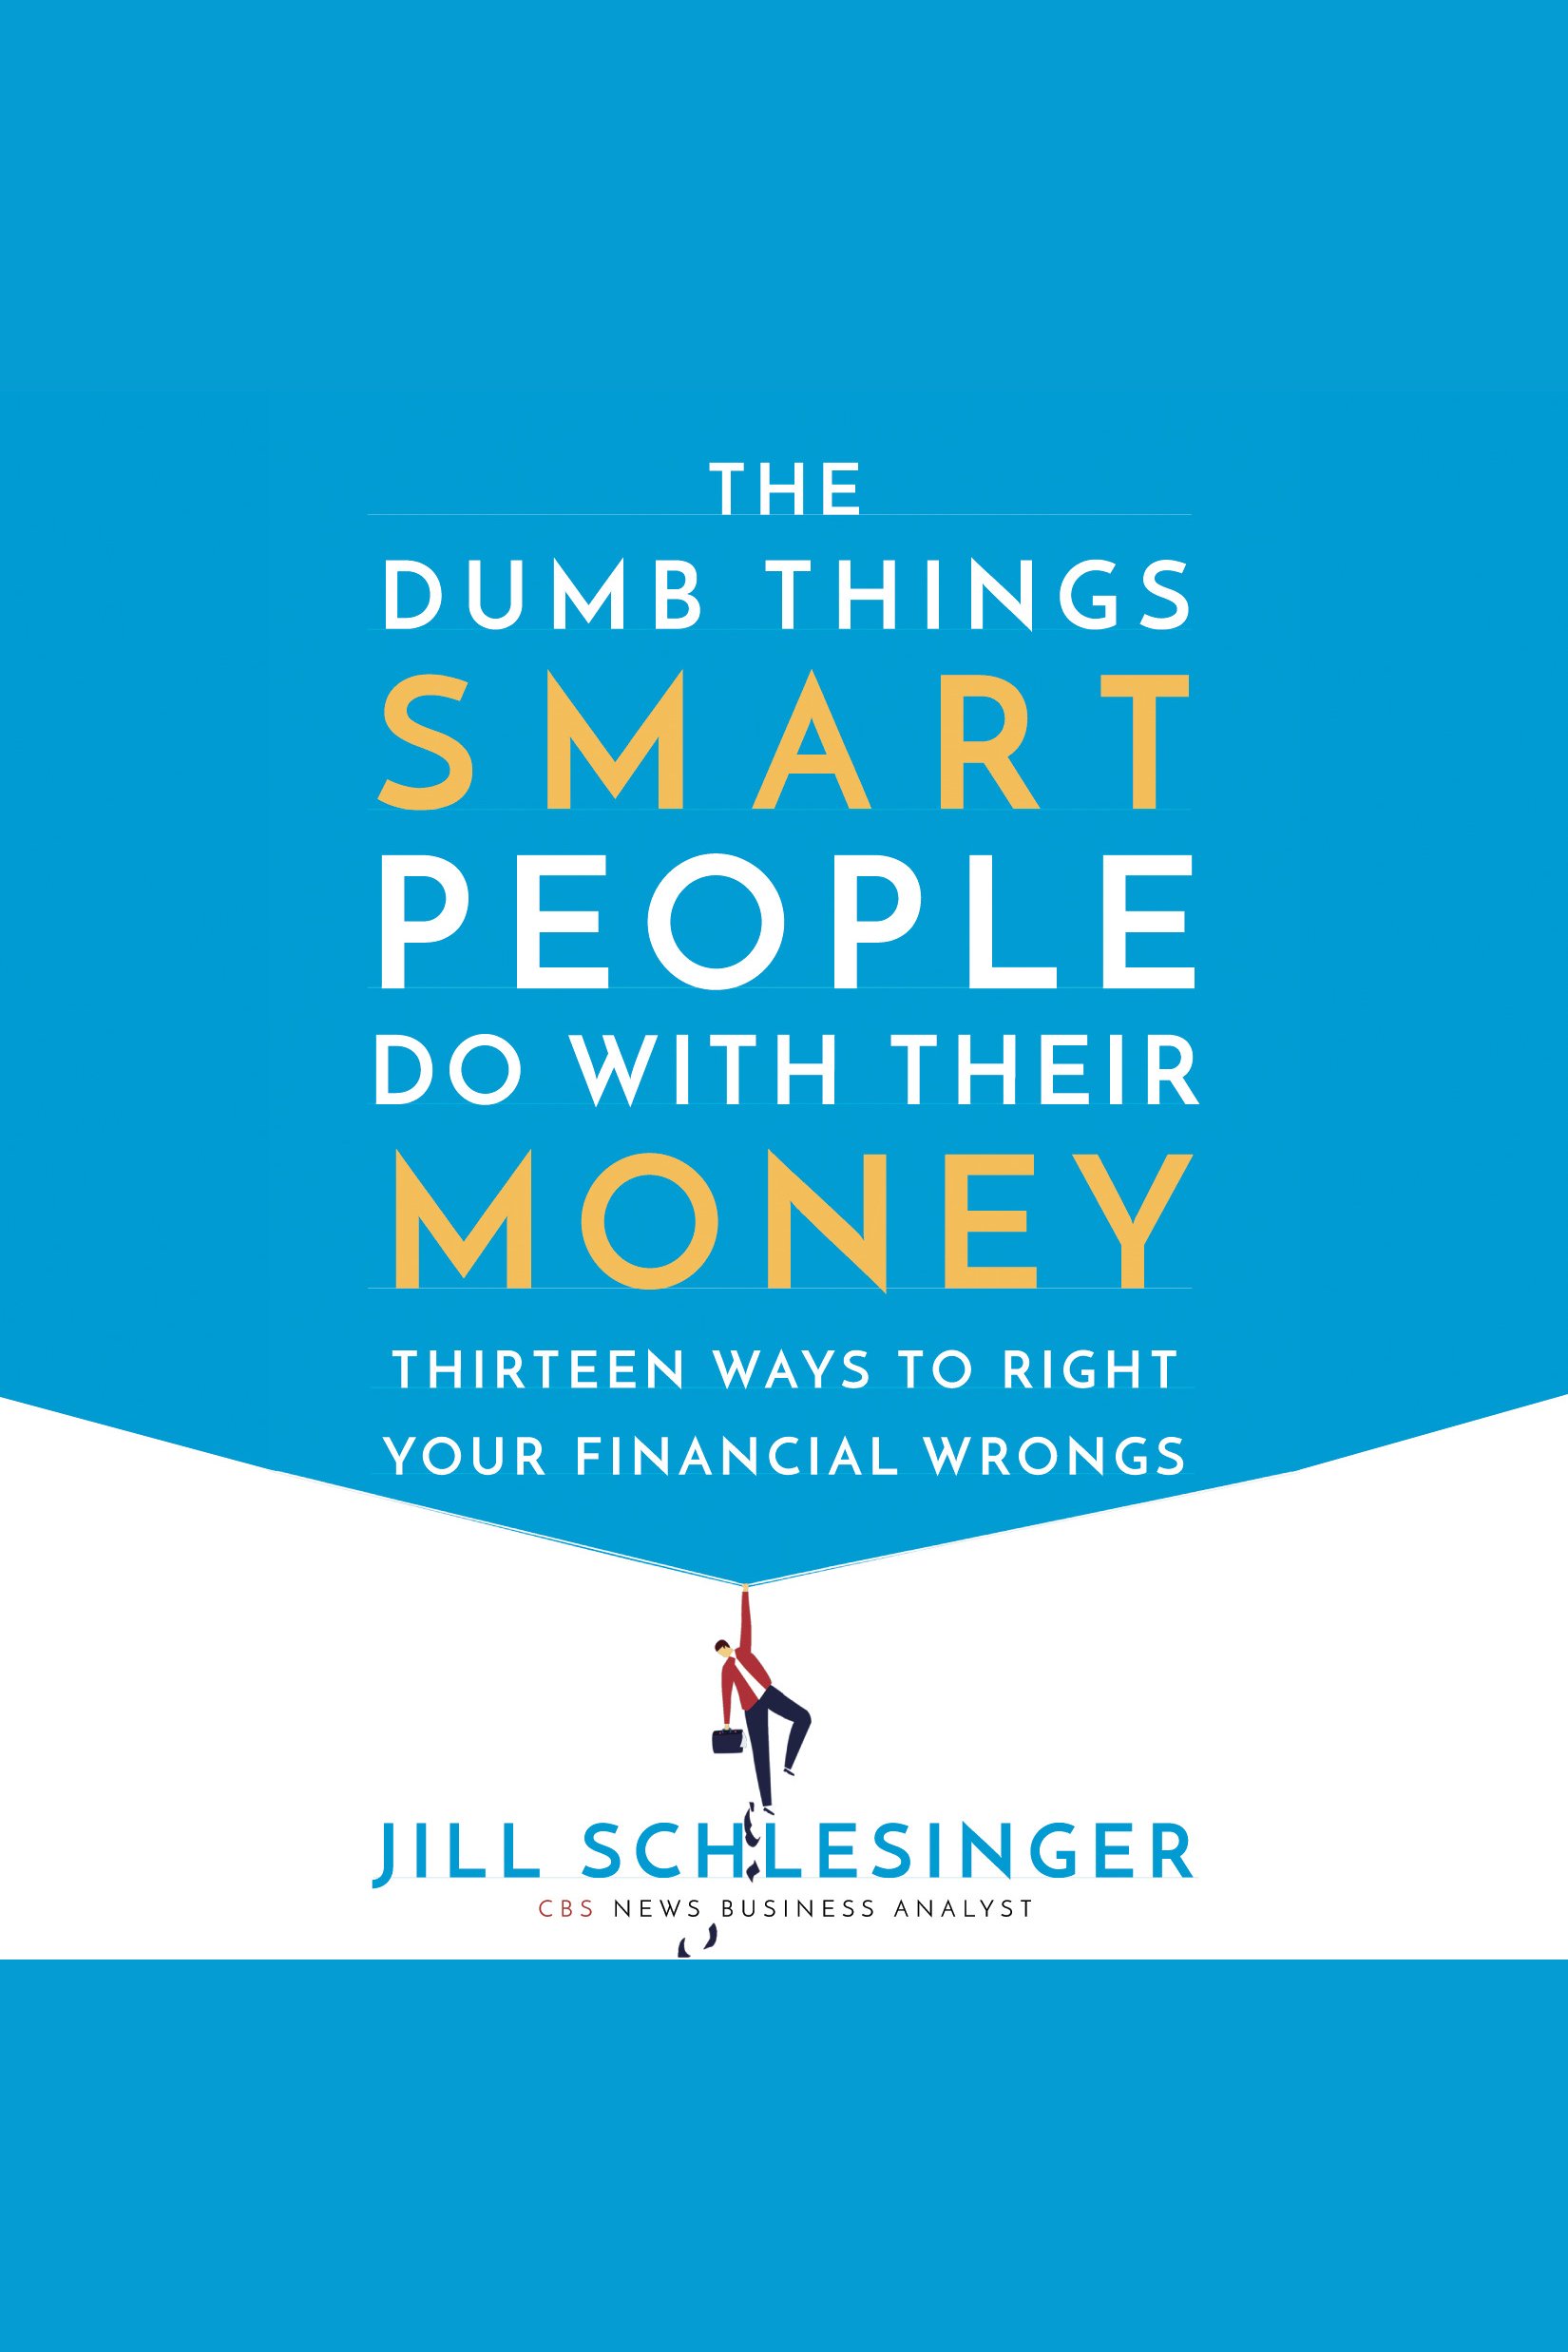 The dumb things smart people do with their money thirteen ways to right your financial wrongs cover image